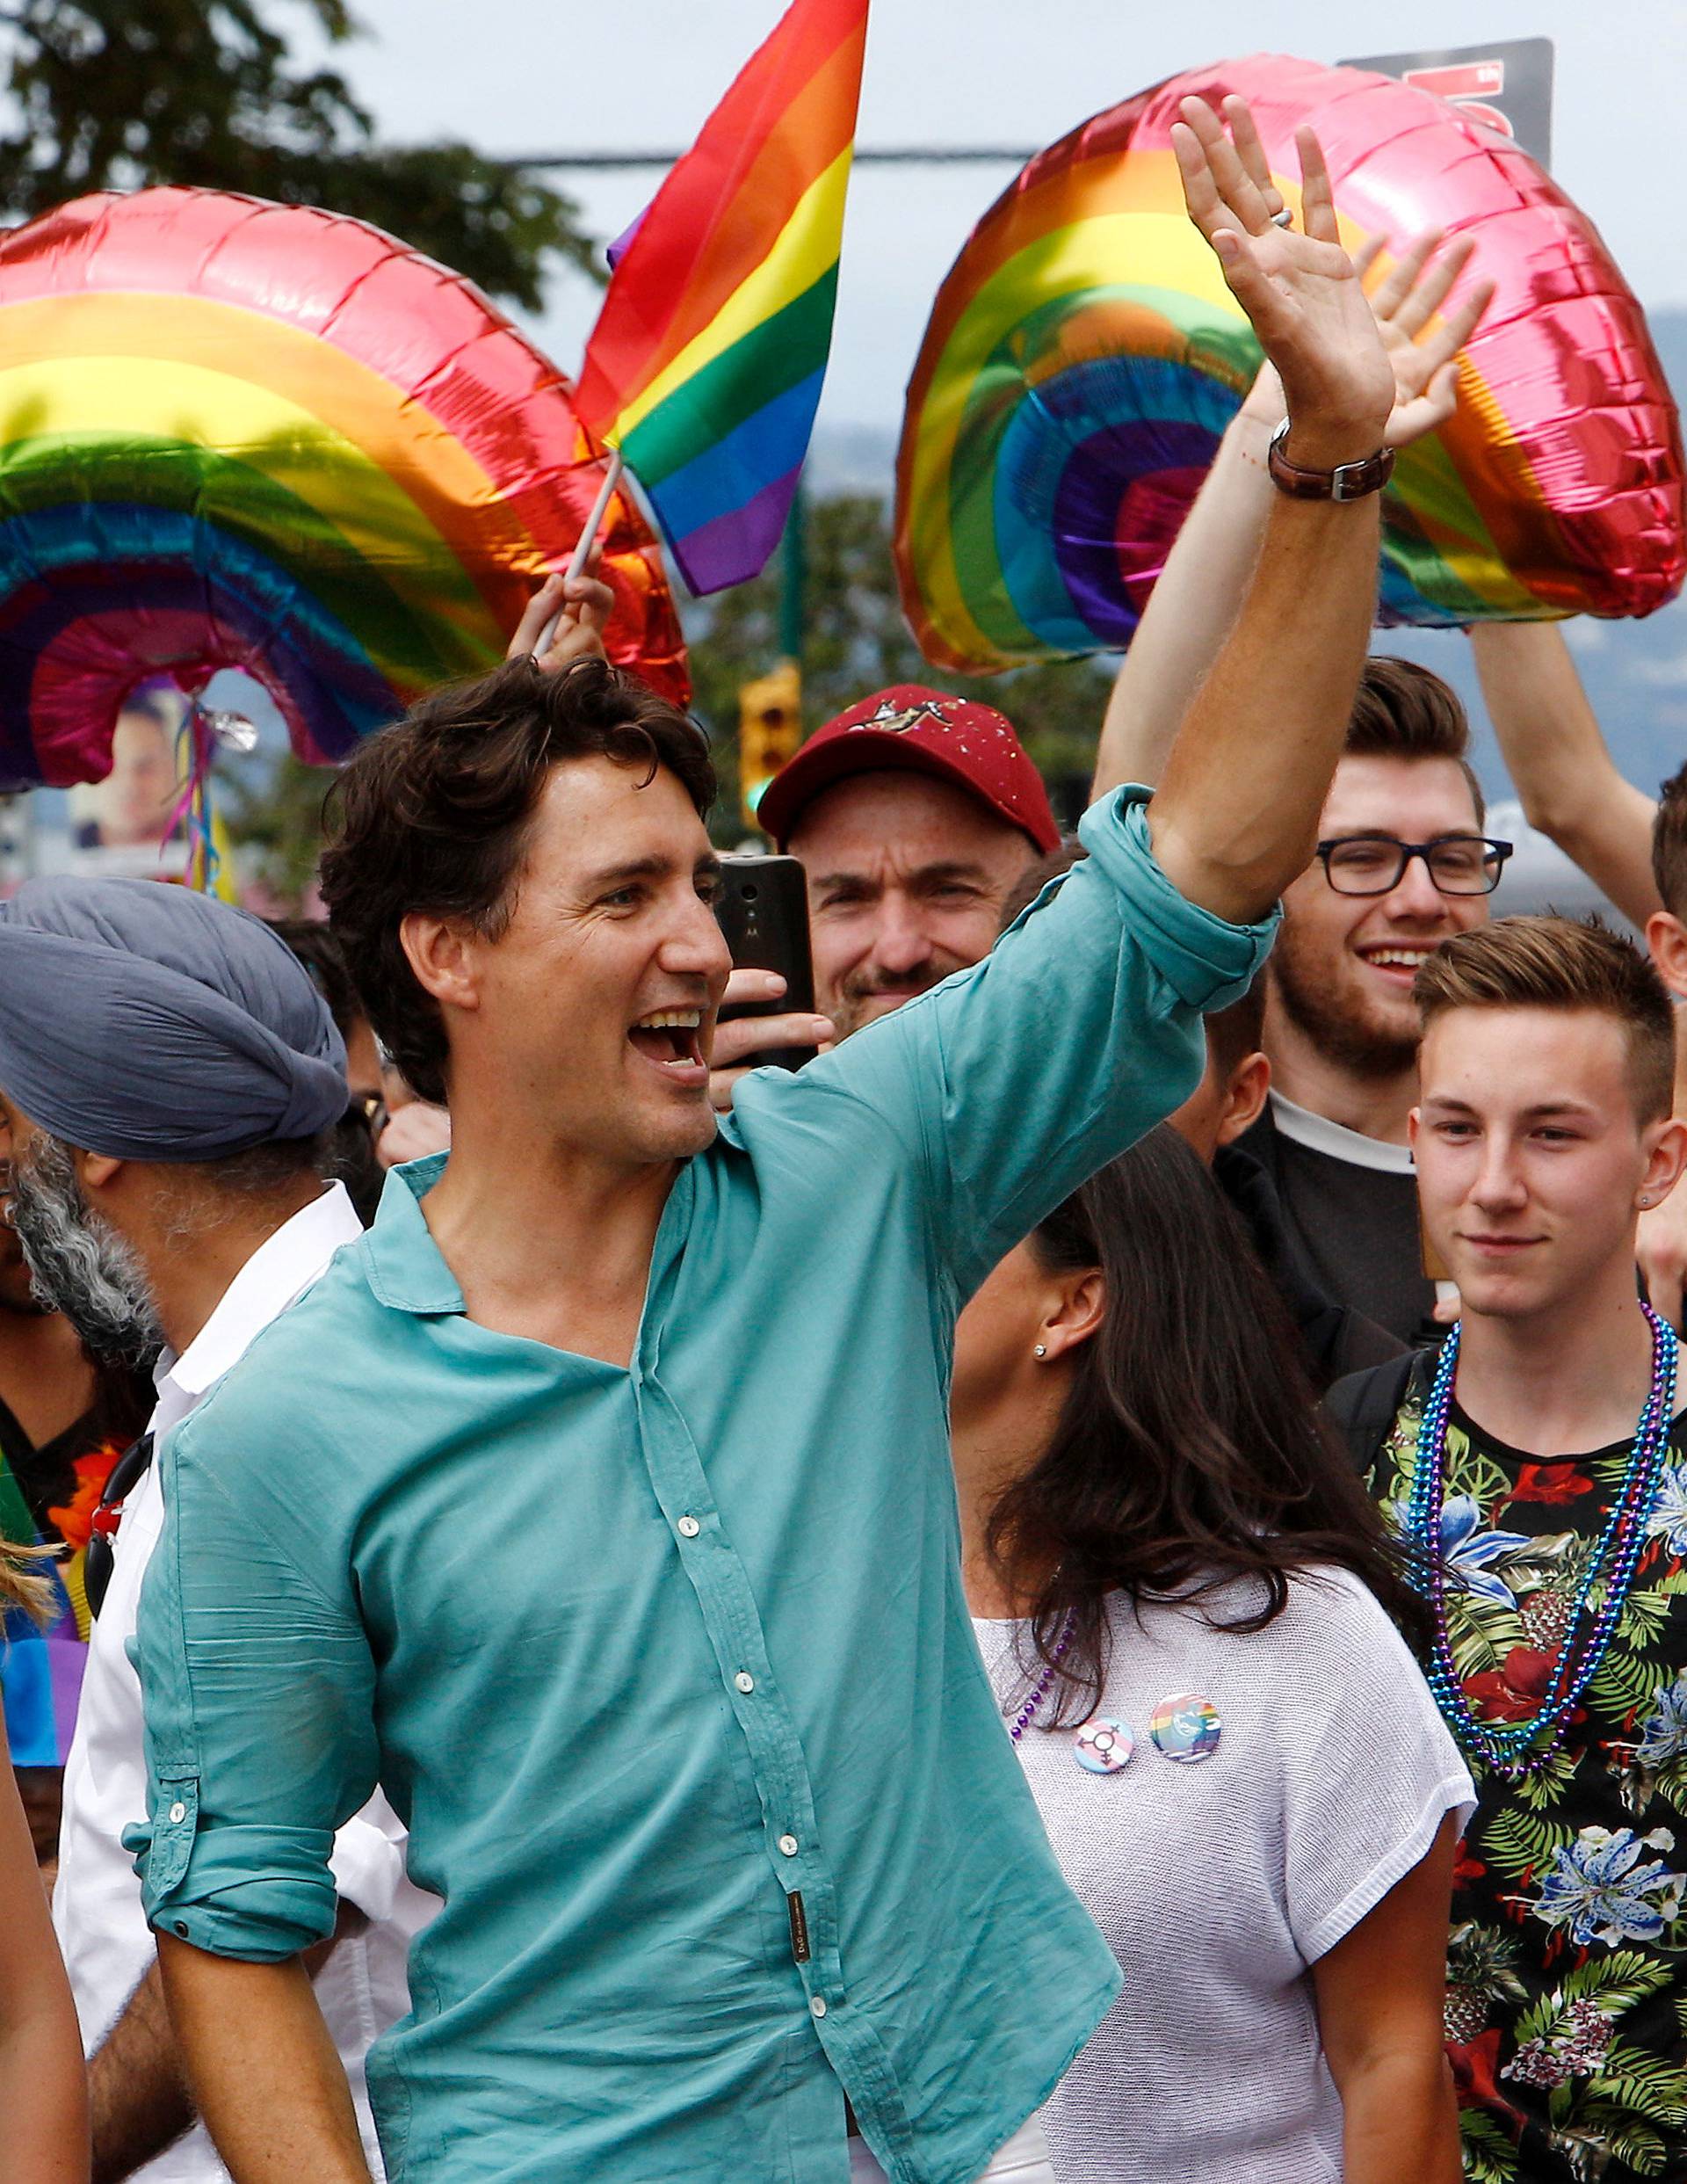 Canada's Prime Minister Justin Trudeau waves to a crowd next to his wife Sophie GrÃ©goire Trudeau while walking in the Vancouver Pride Parade in Vancouver